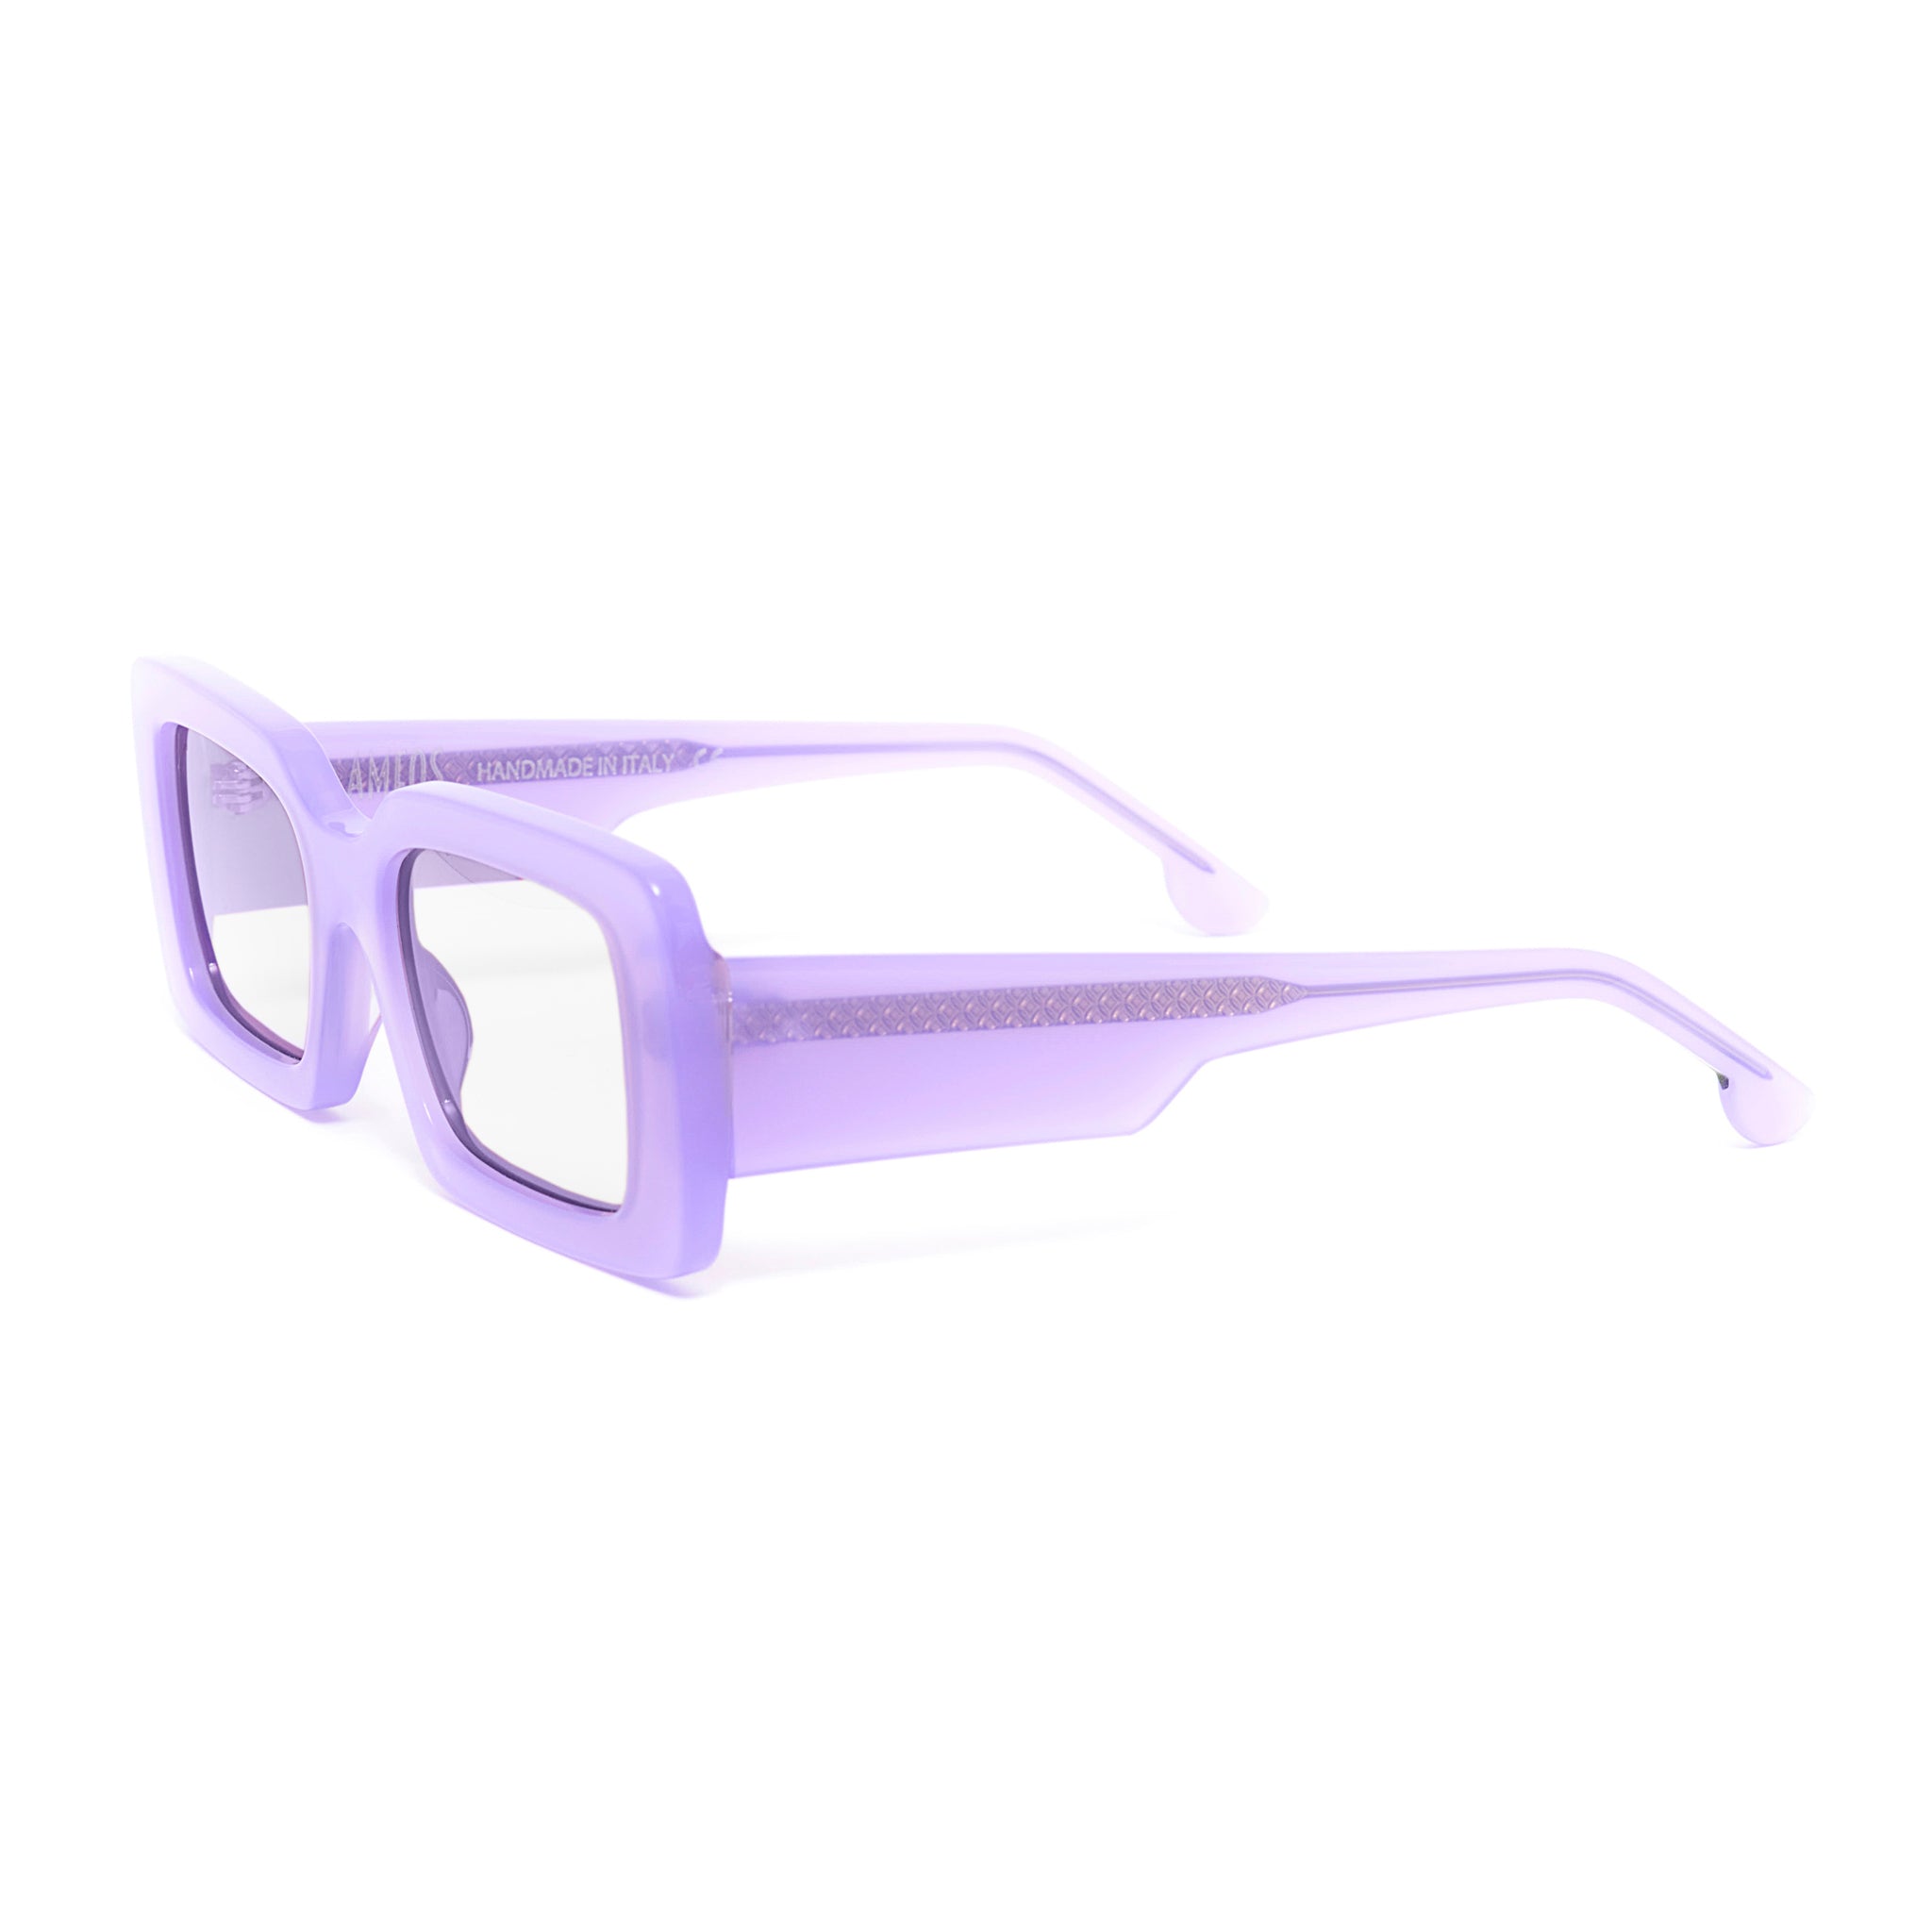 Ameos eyewear mika optical glasses in purple frames. Unisex and handmade in Italy.